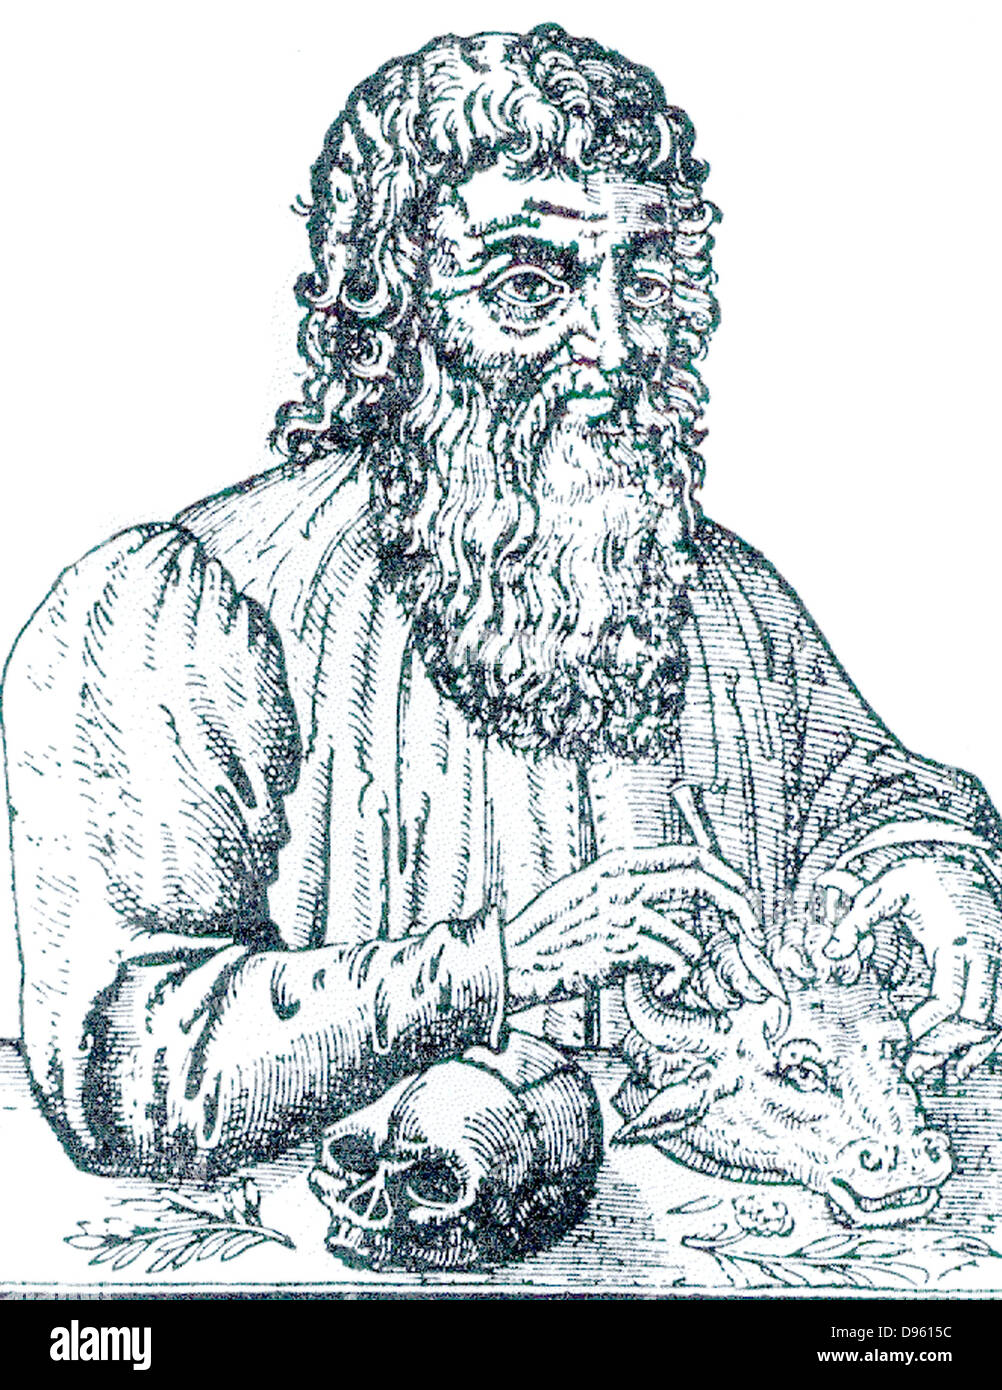 Hippocrates of Cos,' The Prince of Physcians'  according to the French surgeon, Ambroise Pare.  Hippocrates  (born c460 BC) Ancient Greek physician, the father of modern medicine. Woodcut from Pare's 'Surgery', 16th century. Stock Photo